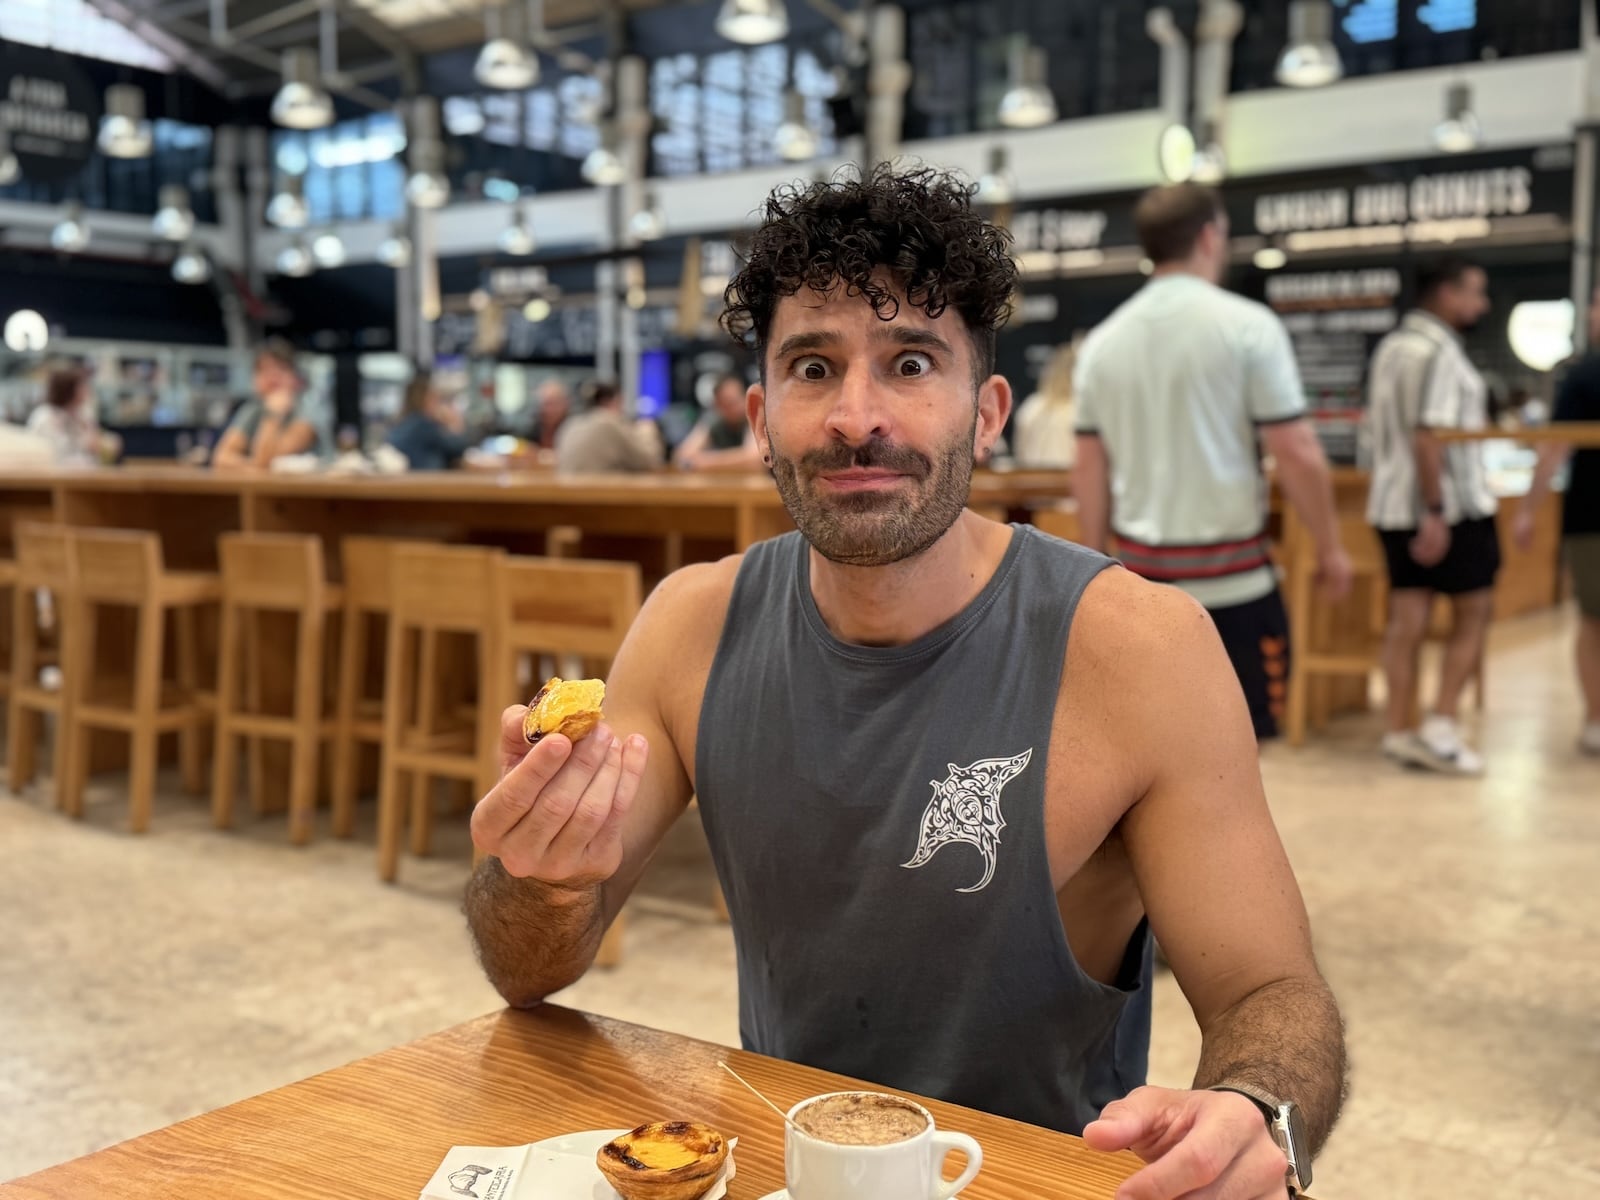 Stefan trying Pasteis de Nata at the Time Out Market in Lisbon.